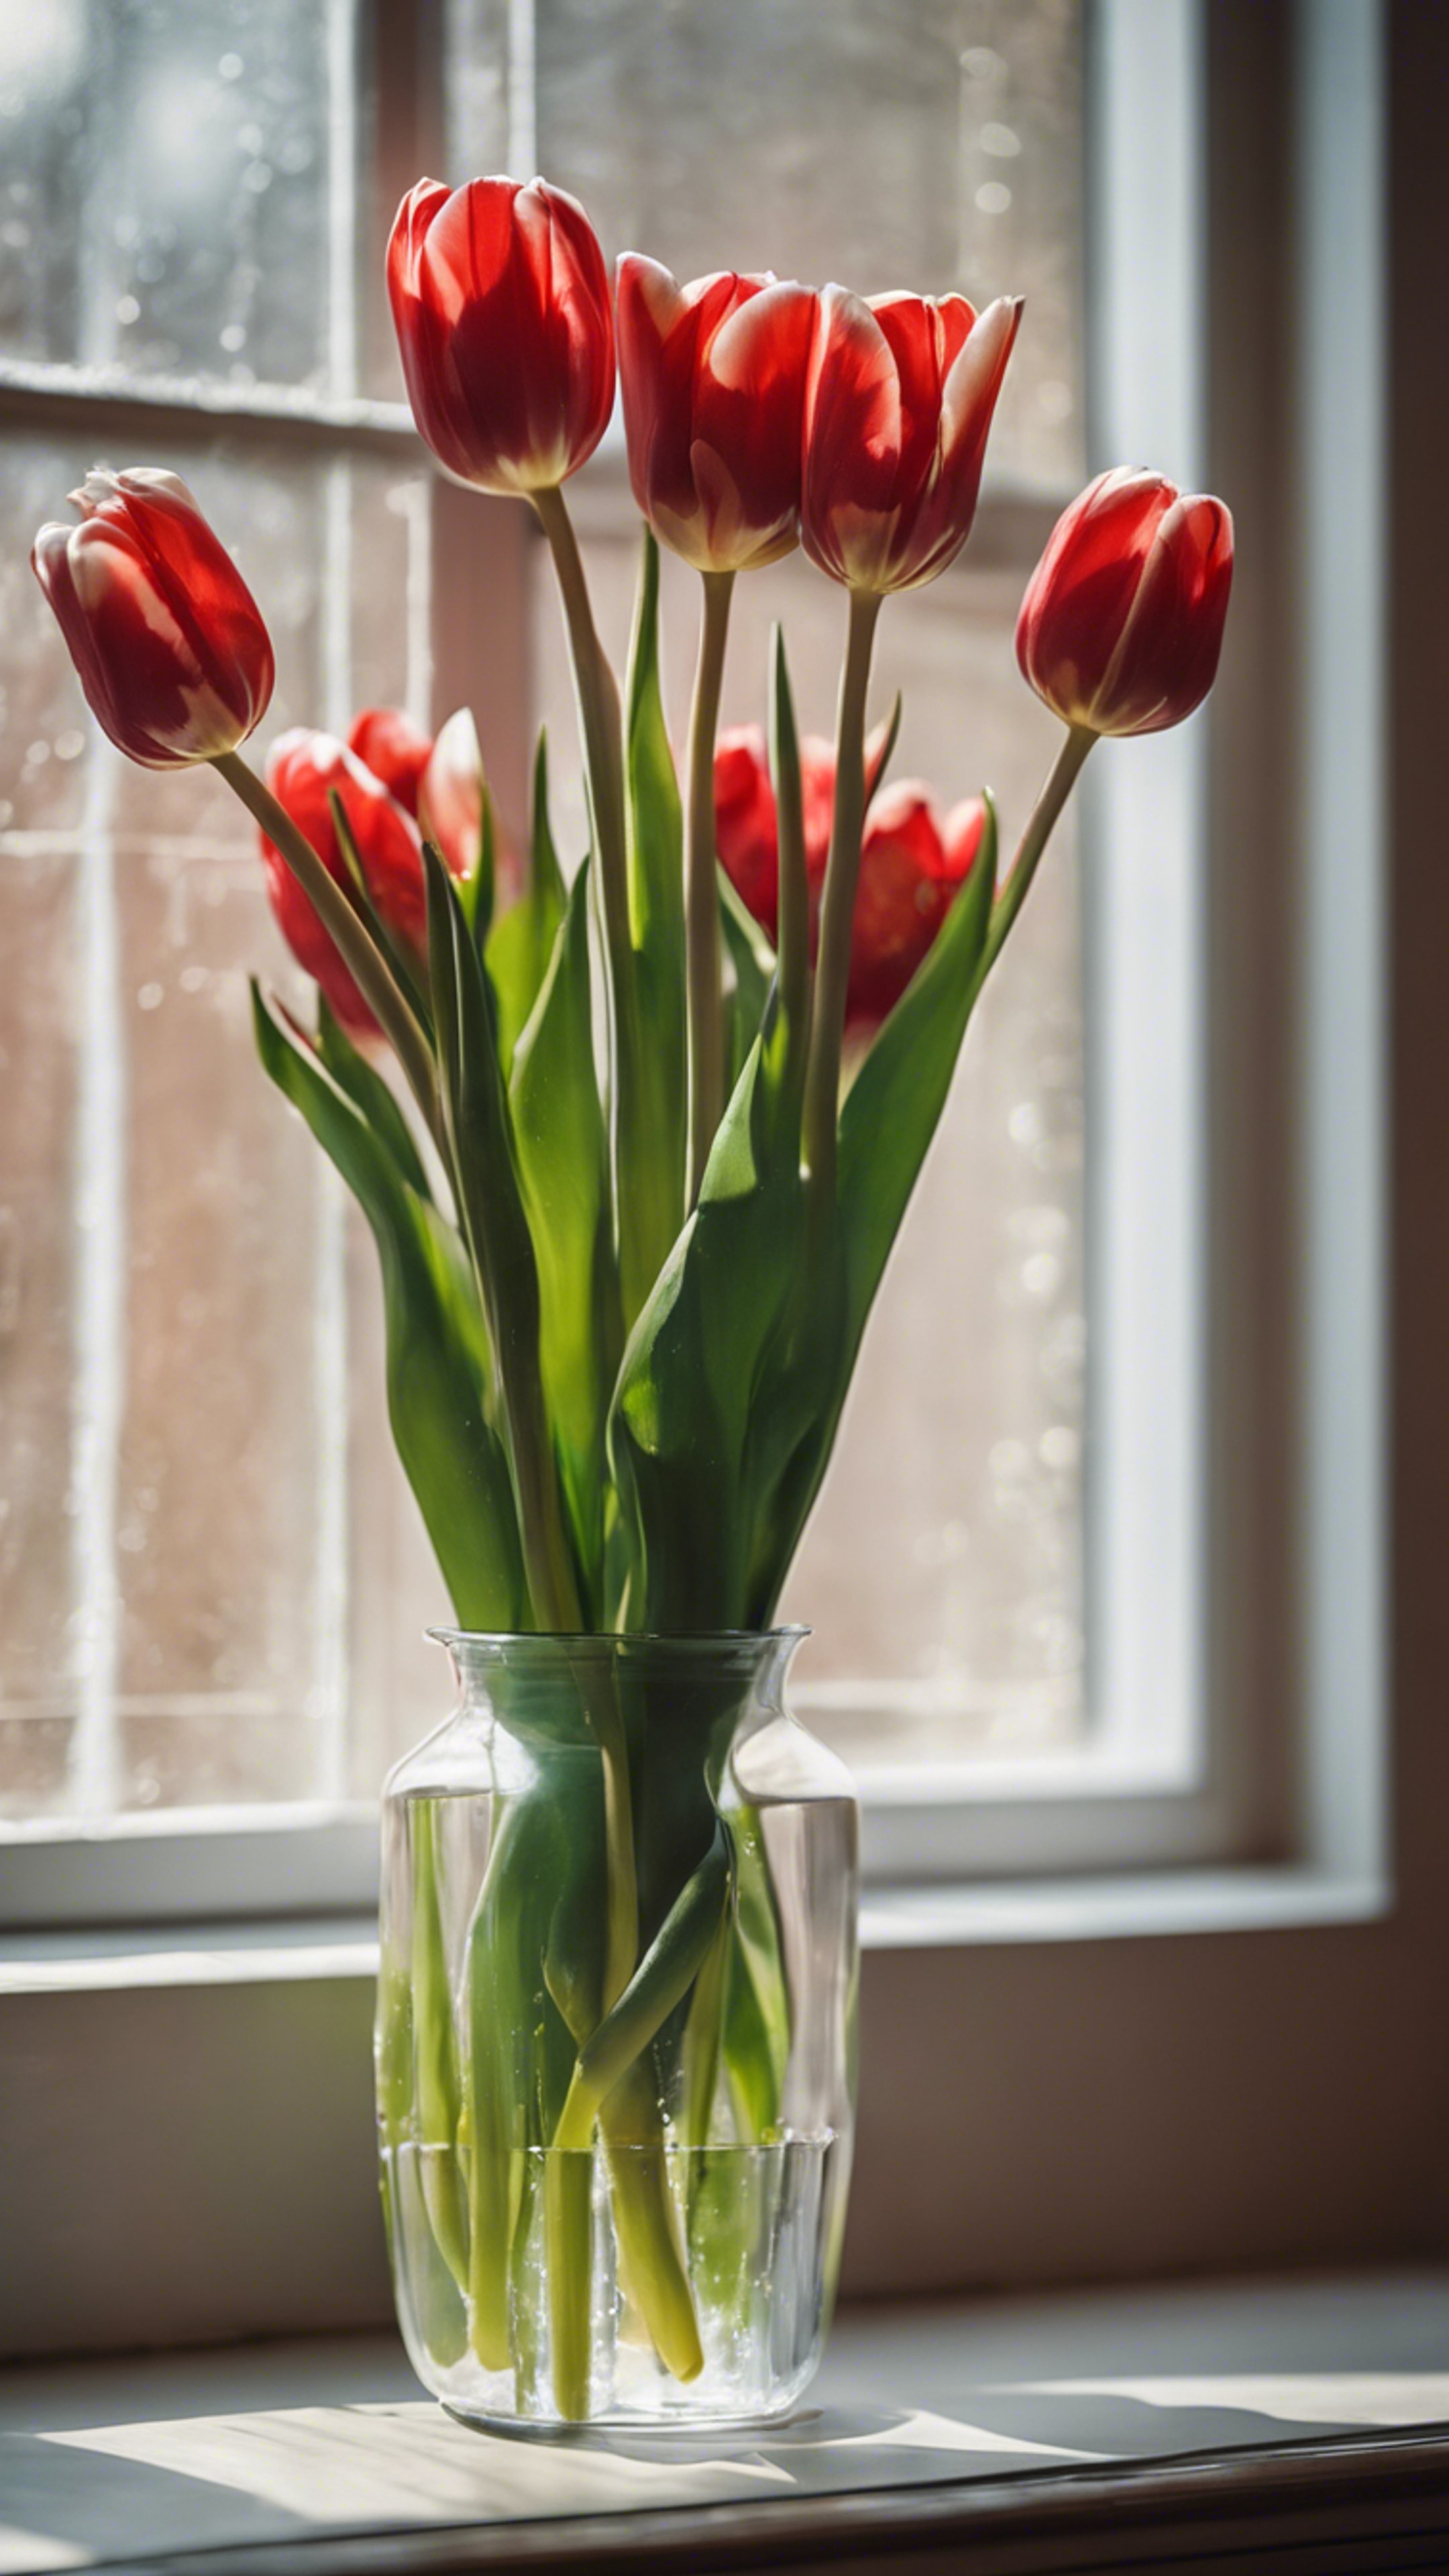 A bunch of vivid red and white tulips in a glass vase, lit by natural light. Обои[fc69acd6917c413b913f]